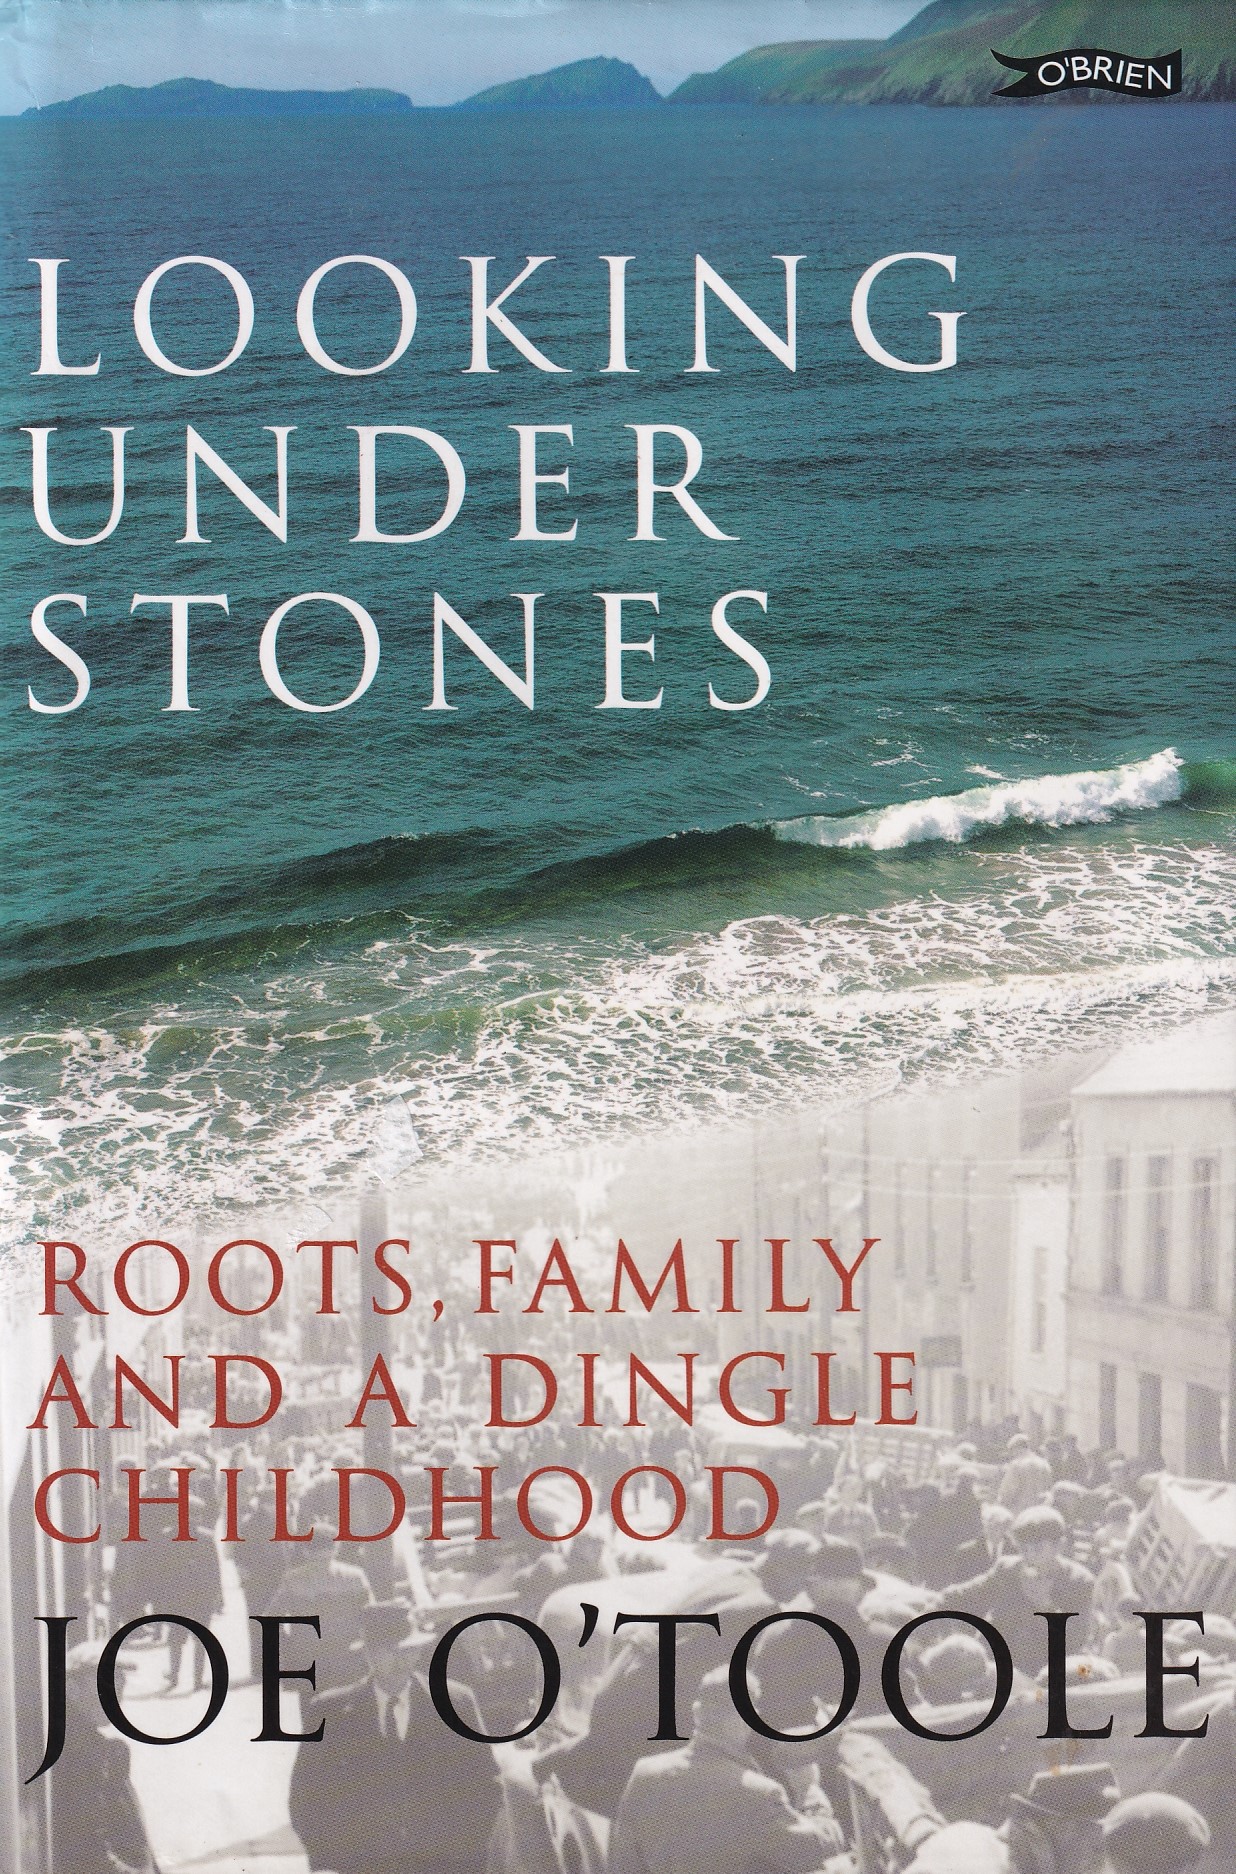 Looking Under Stones: Roots, Family and a Dingle Childhood [Signed] | Joe O'Toole | Charlie Byrne's